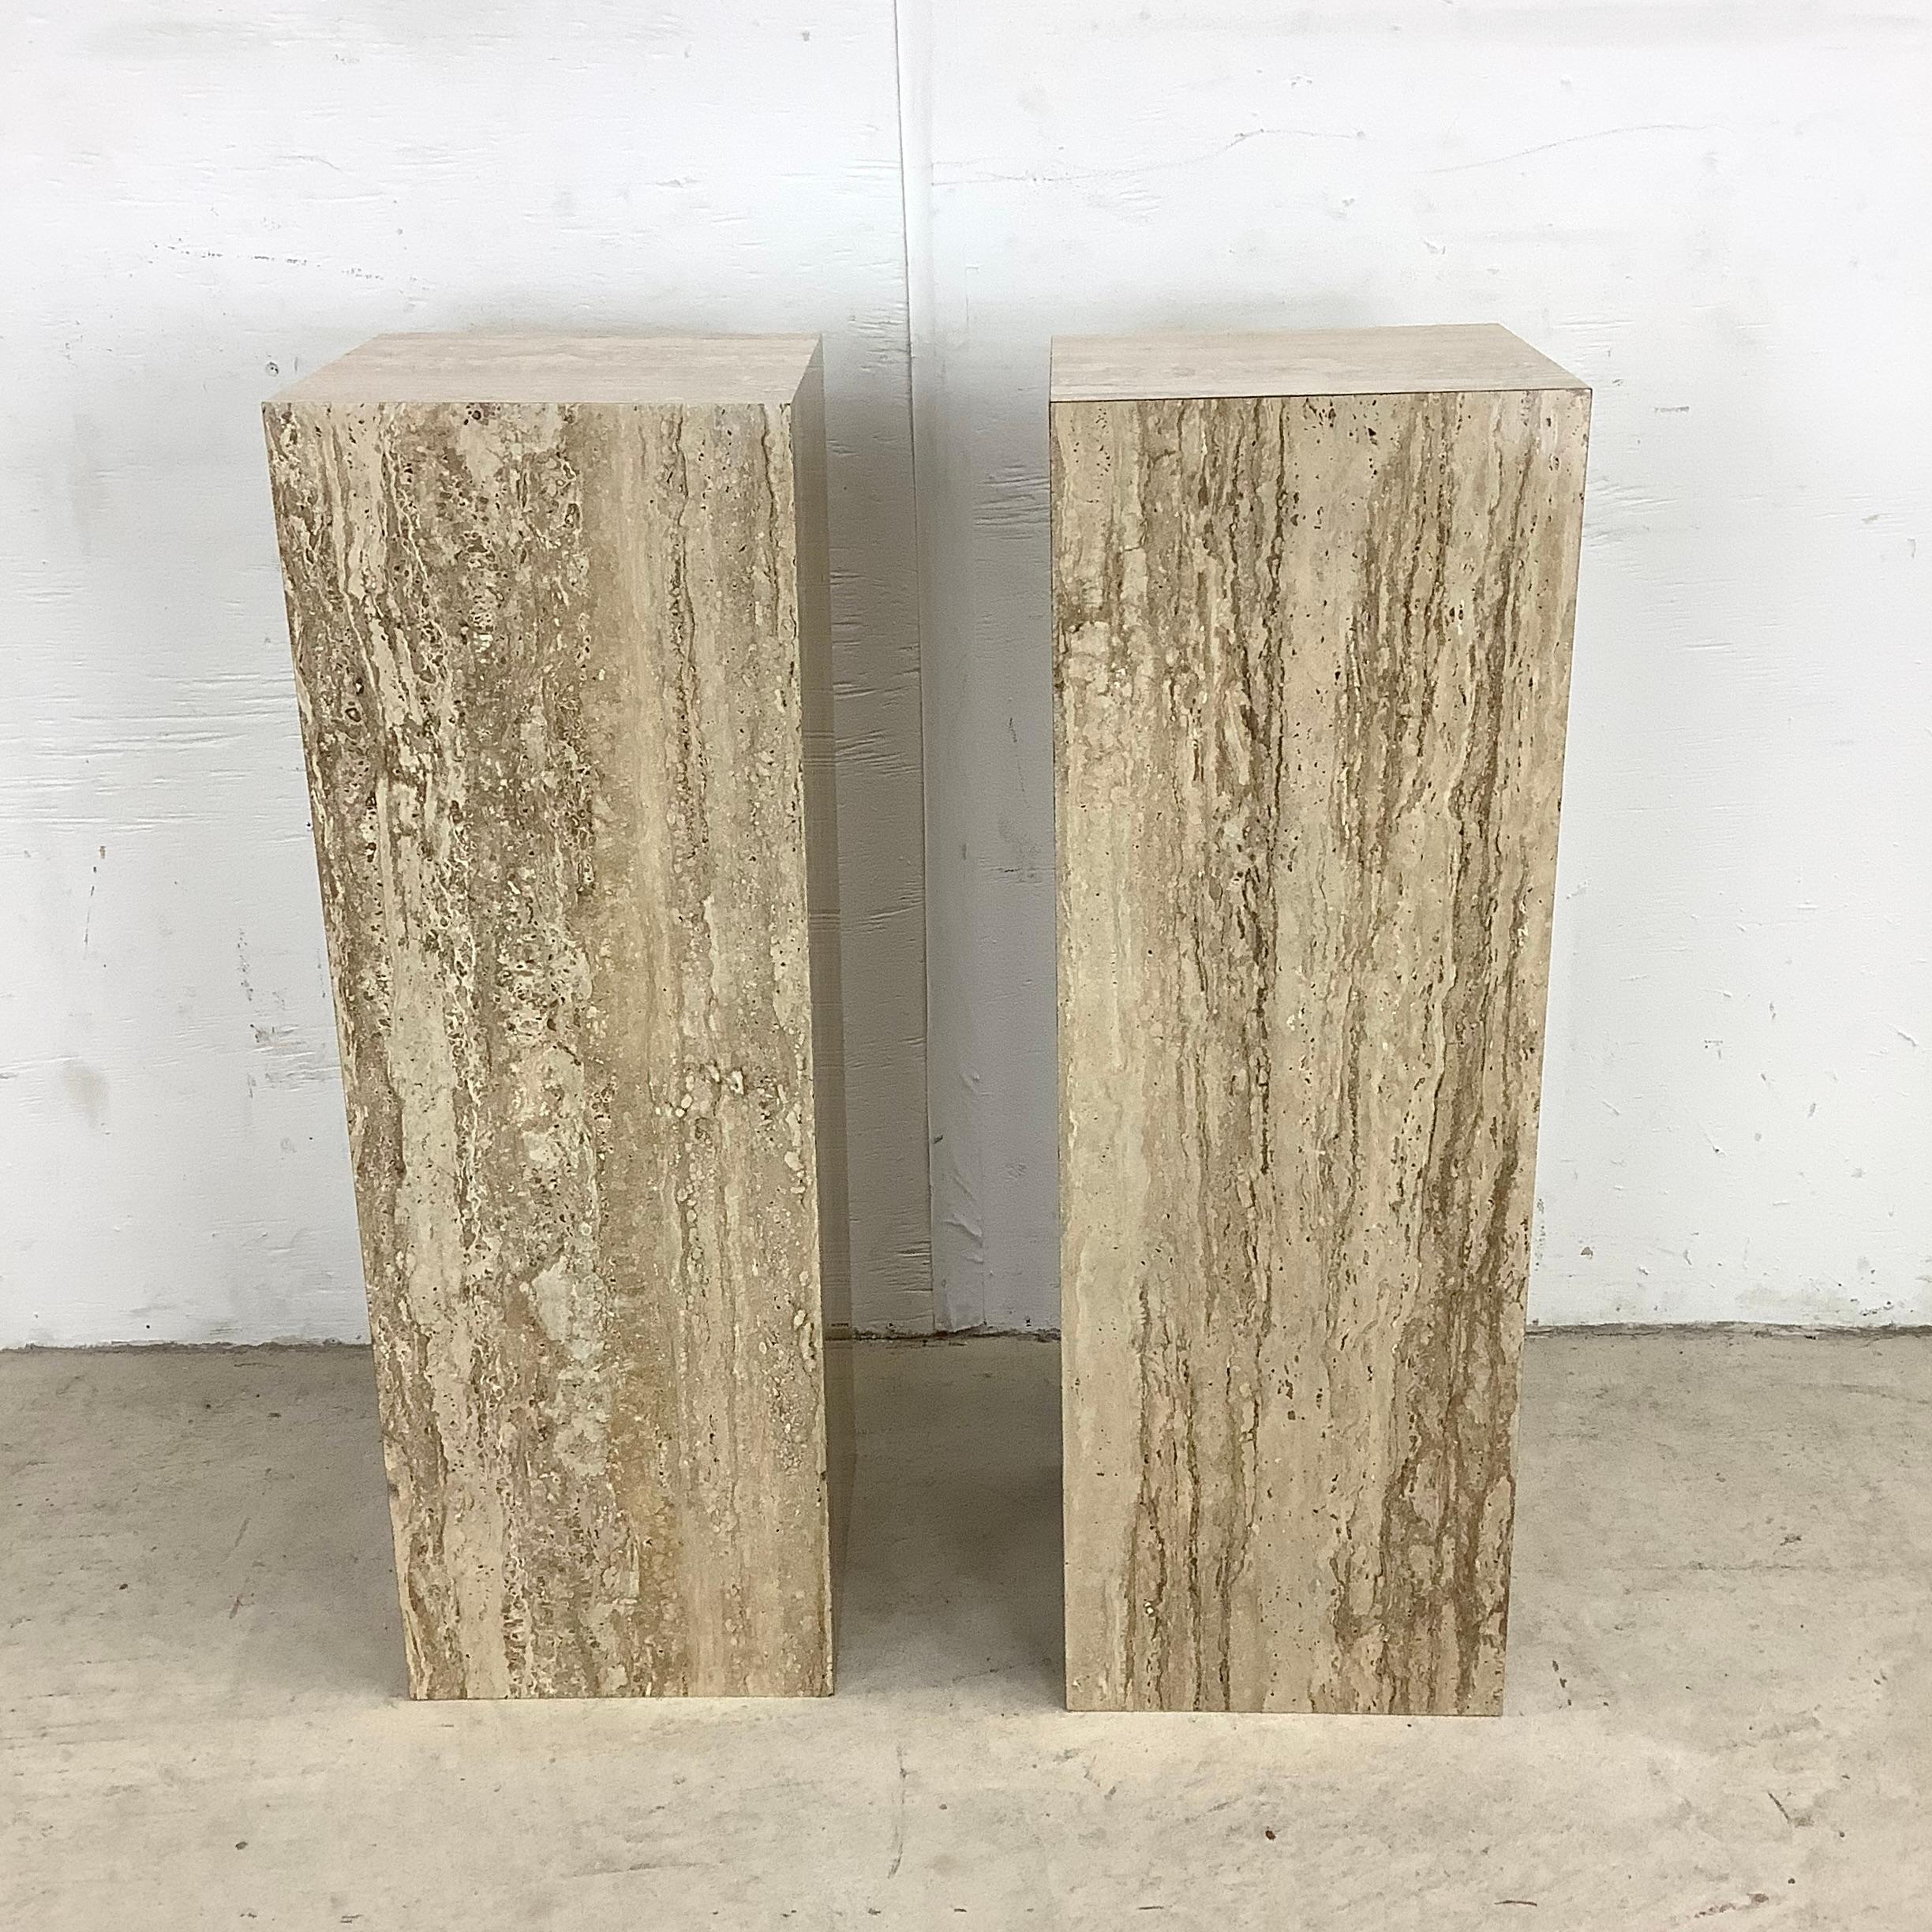 This matching pair of vintage modern display pedestals feature durable faux stone laminate finish and clean modern lines. The pair stands thirty inches tall and make an ideal set of accent display tables for home or office, perfect for vase or